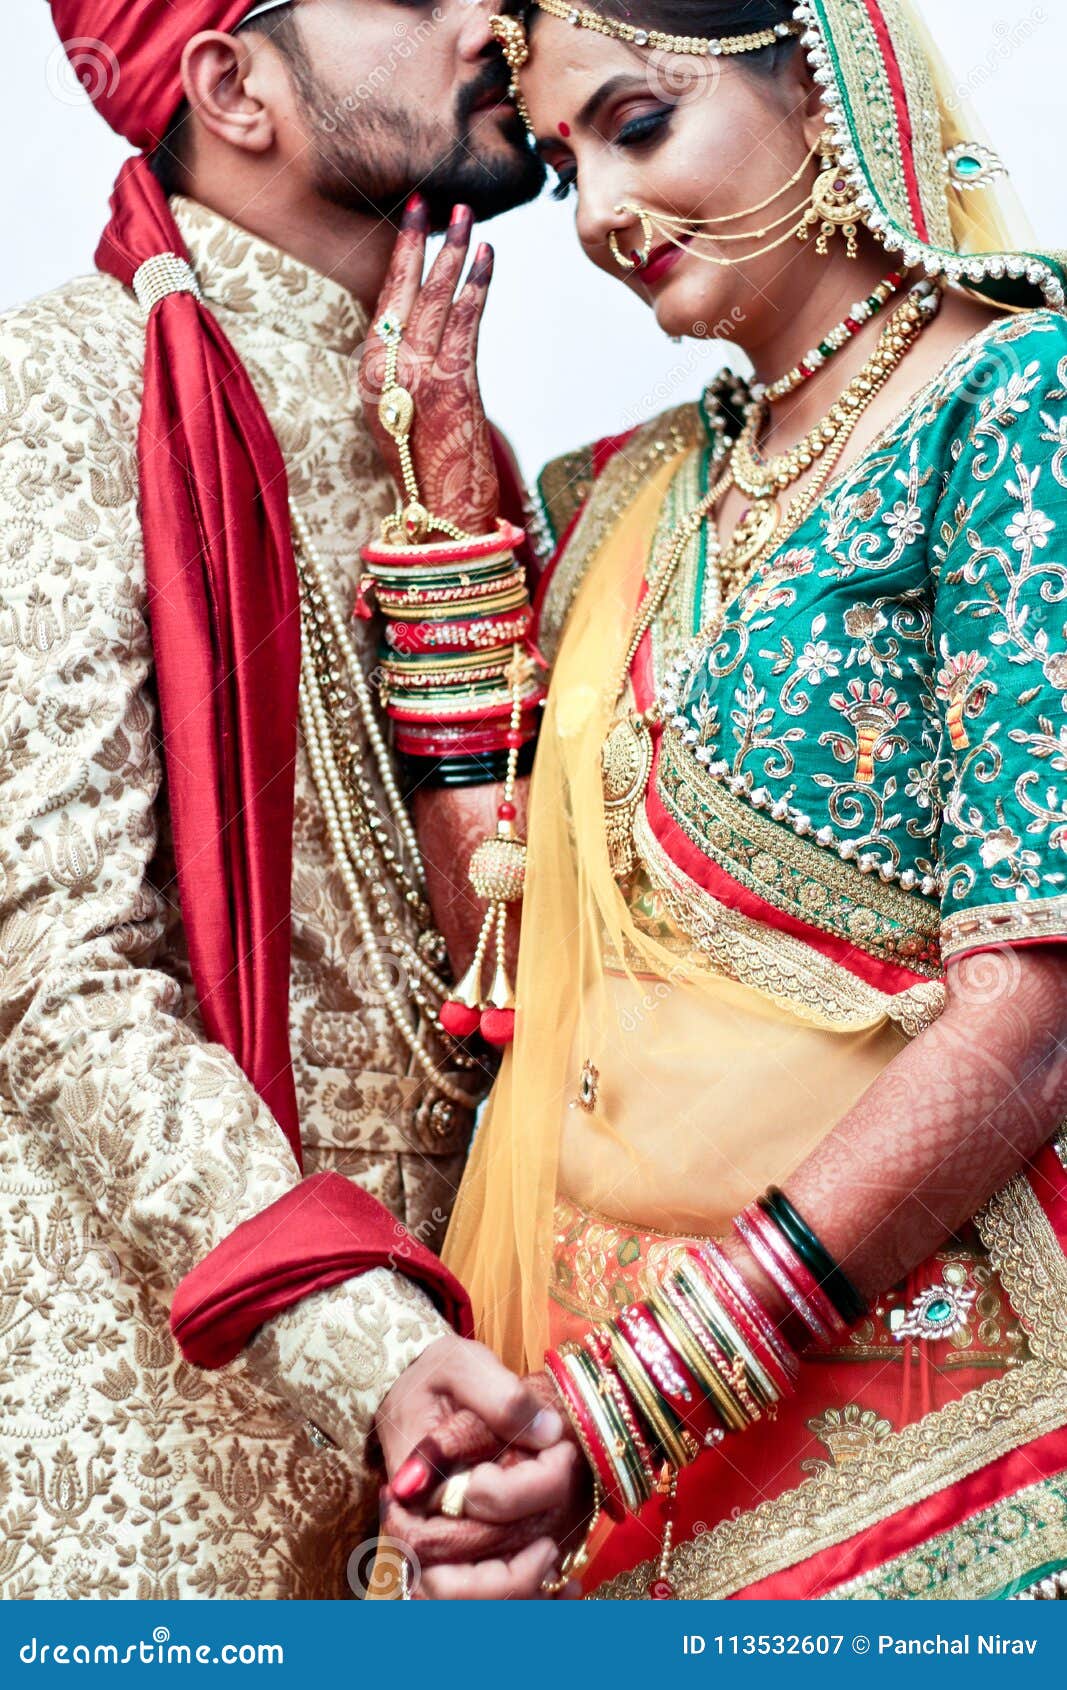 These Bengali Bridal Portraits Have Our Hearts! | WedMeGood